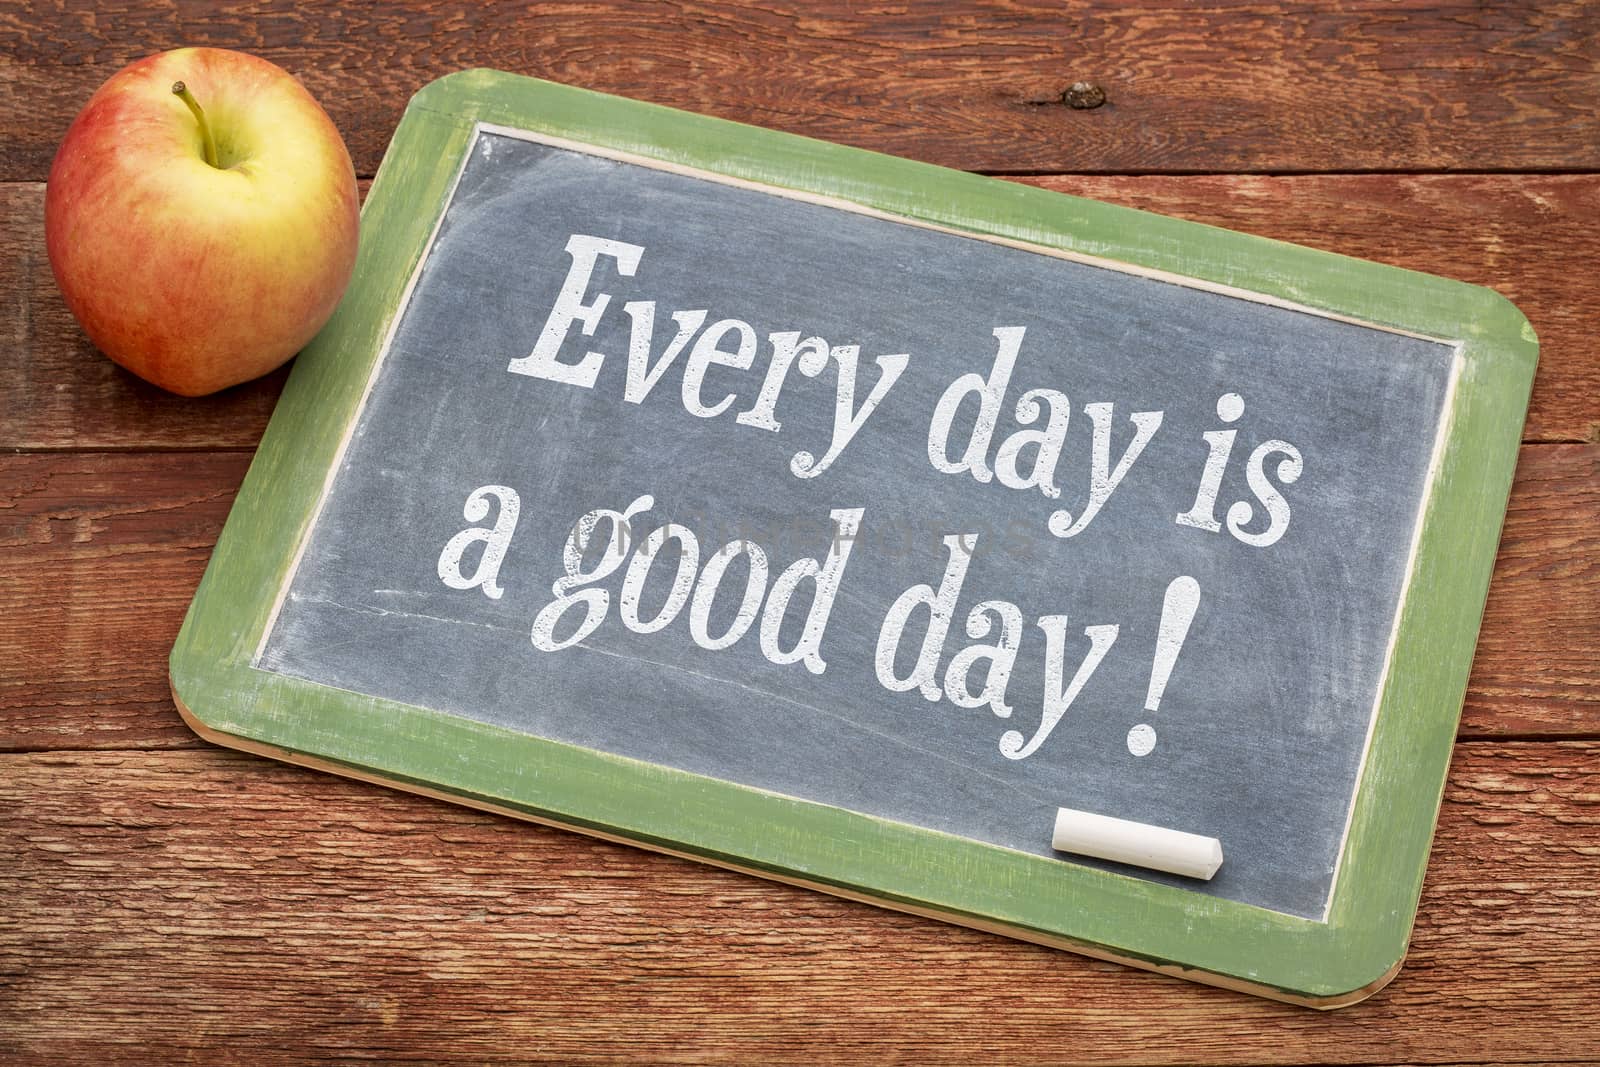 Every day is good day - positive words on a slate blackboard against red barn wood